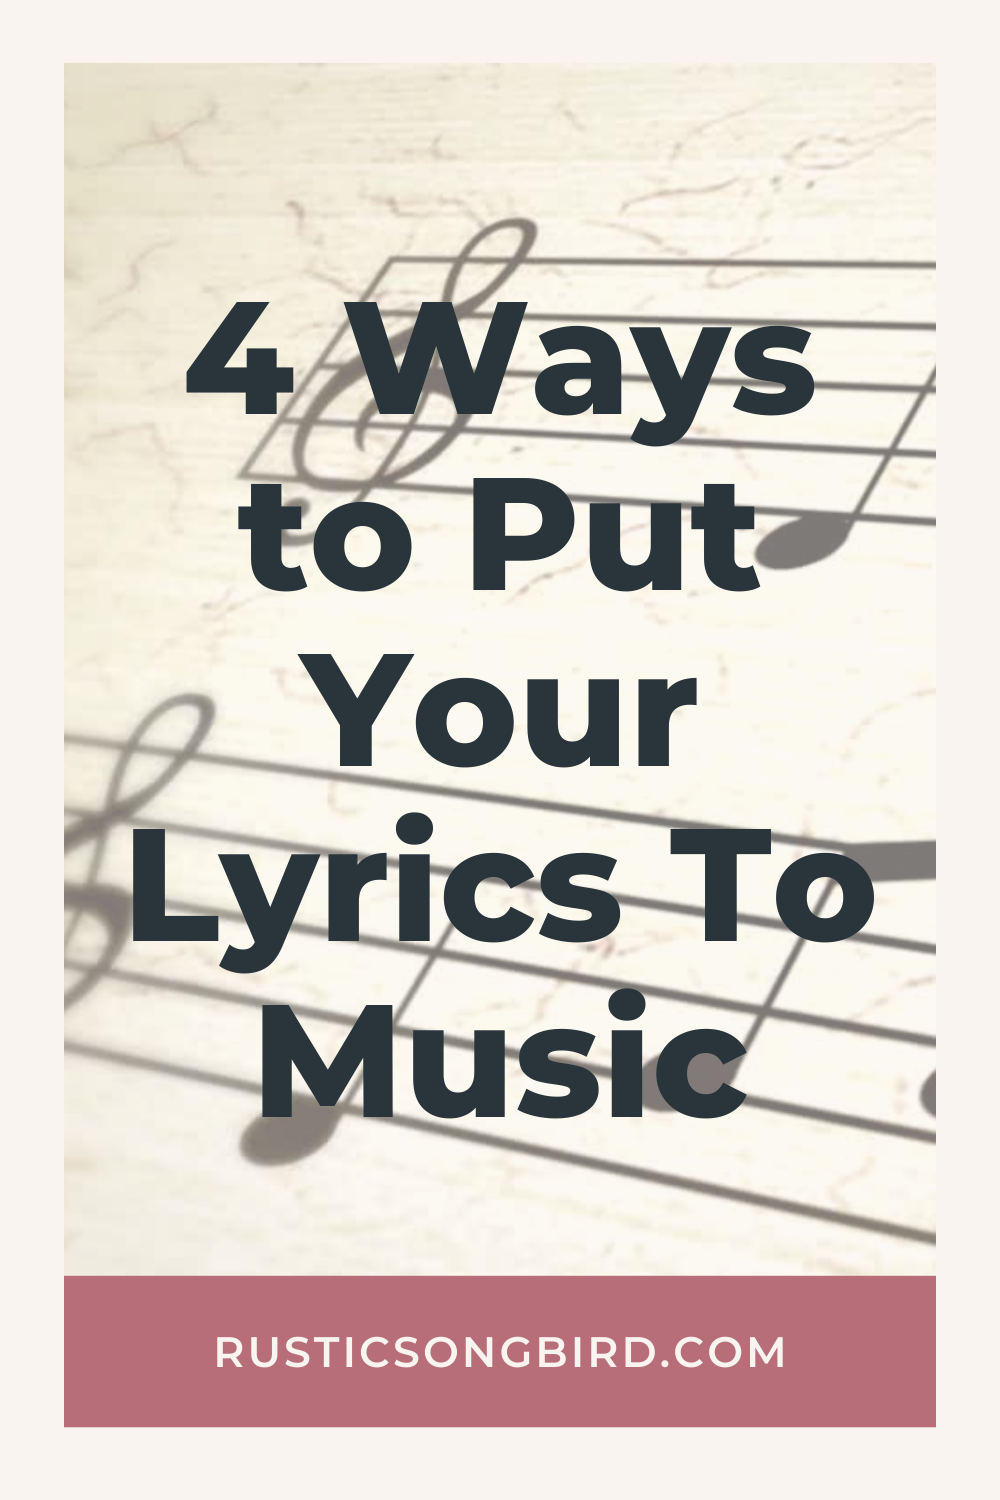 sheet music notes in the background and title text that says "4 ways to put your lyrics to music"